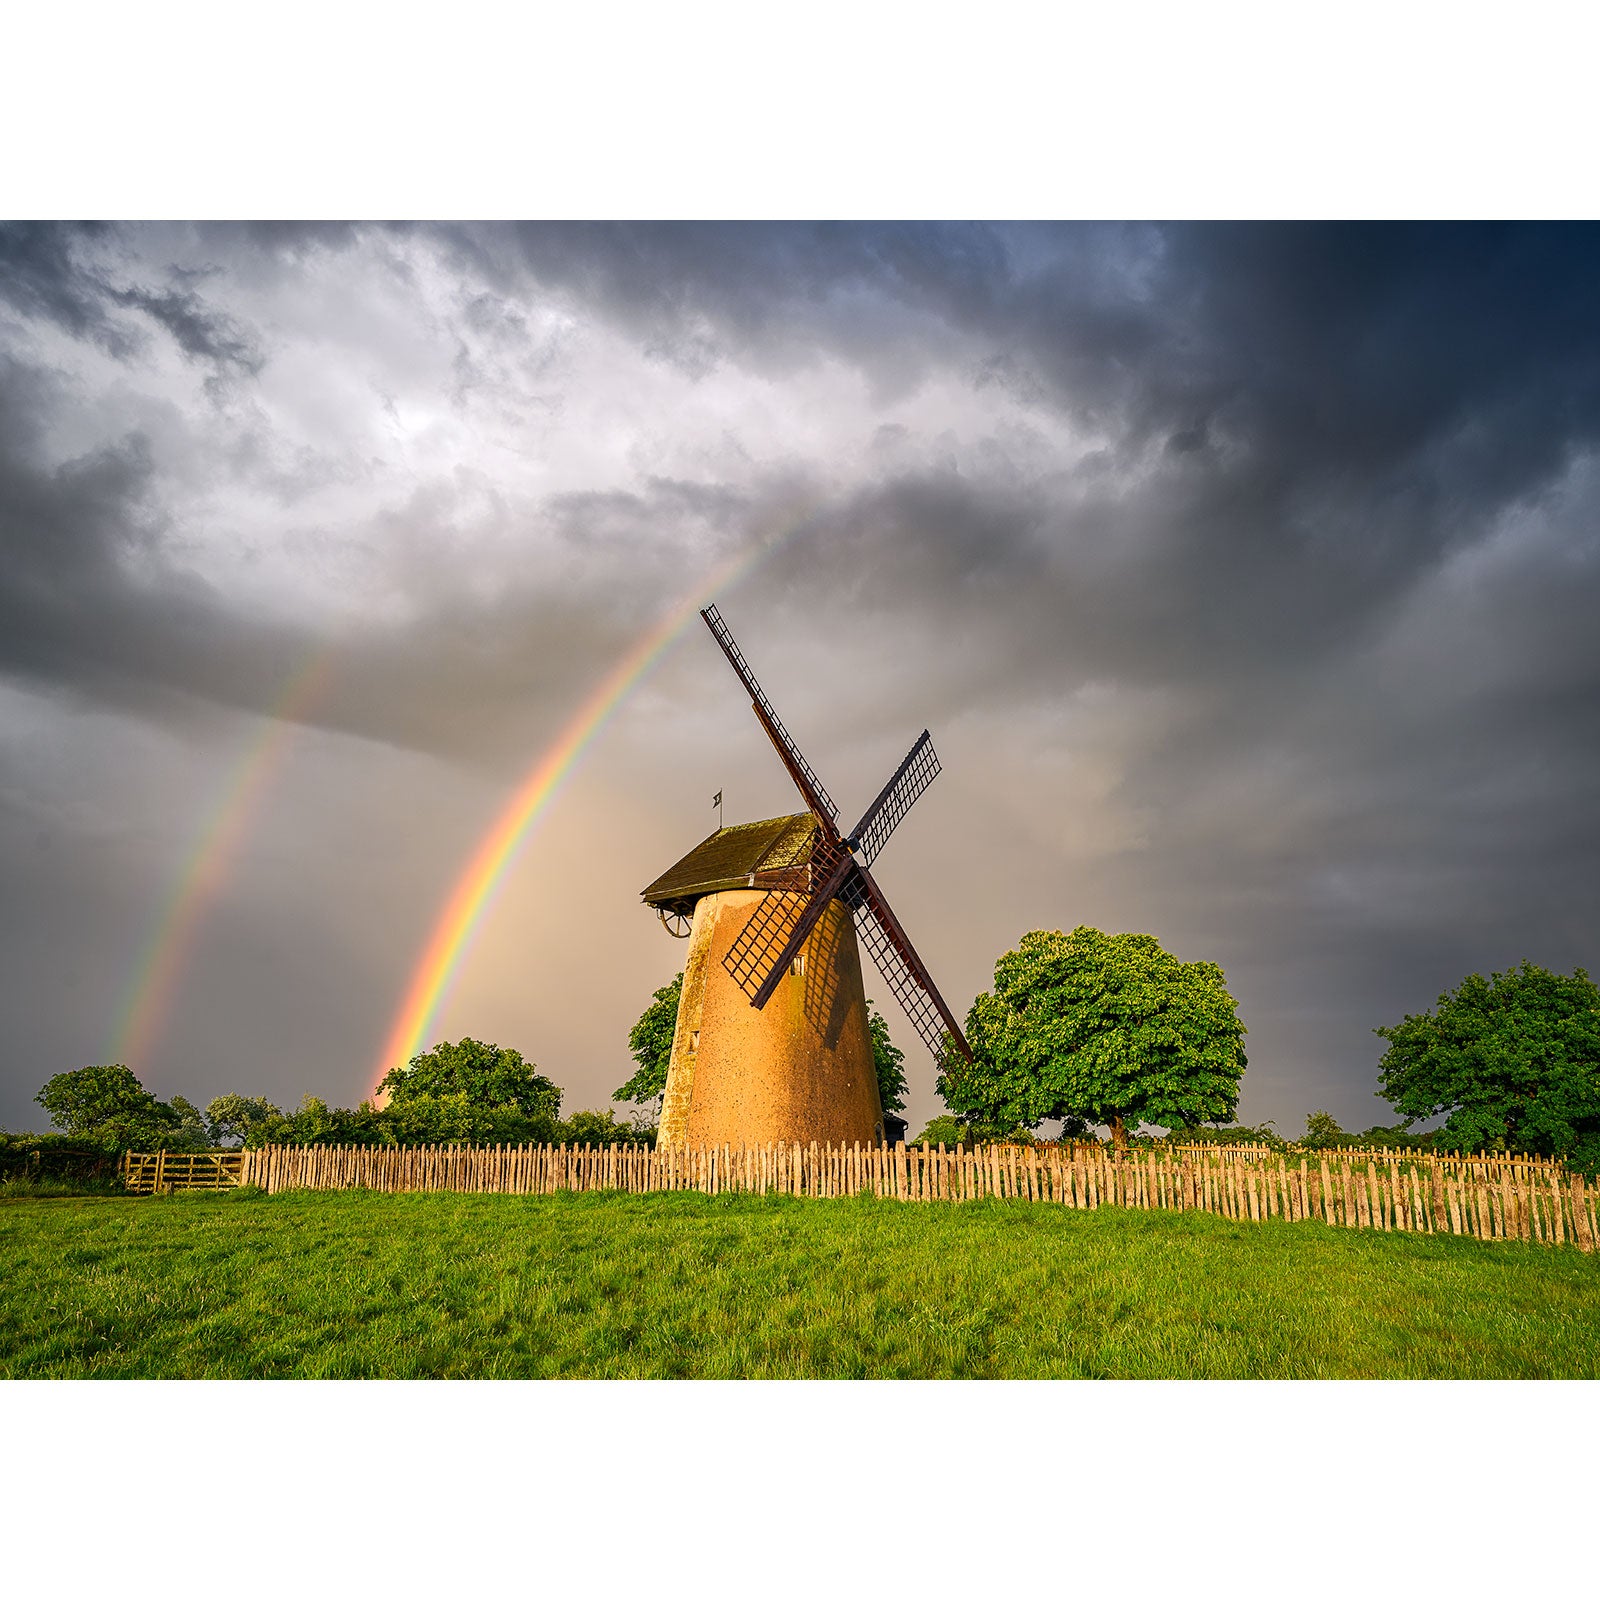 Bembridge Windmill on the Isle of Wight with a double rainbow in the stormy sky, captured by Available Light Photography.